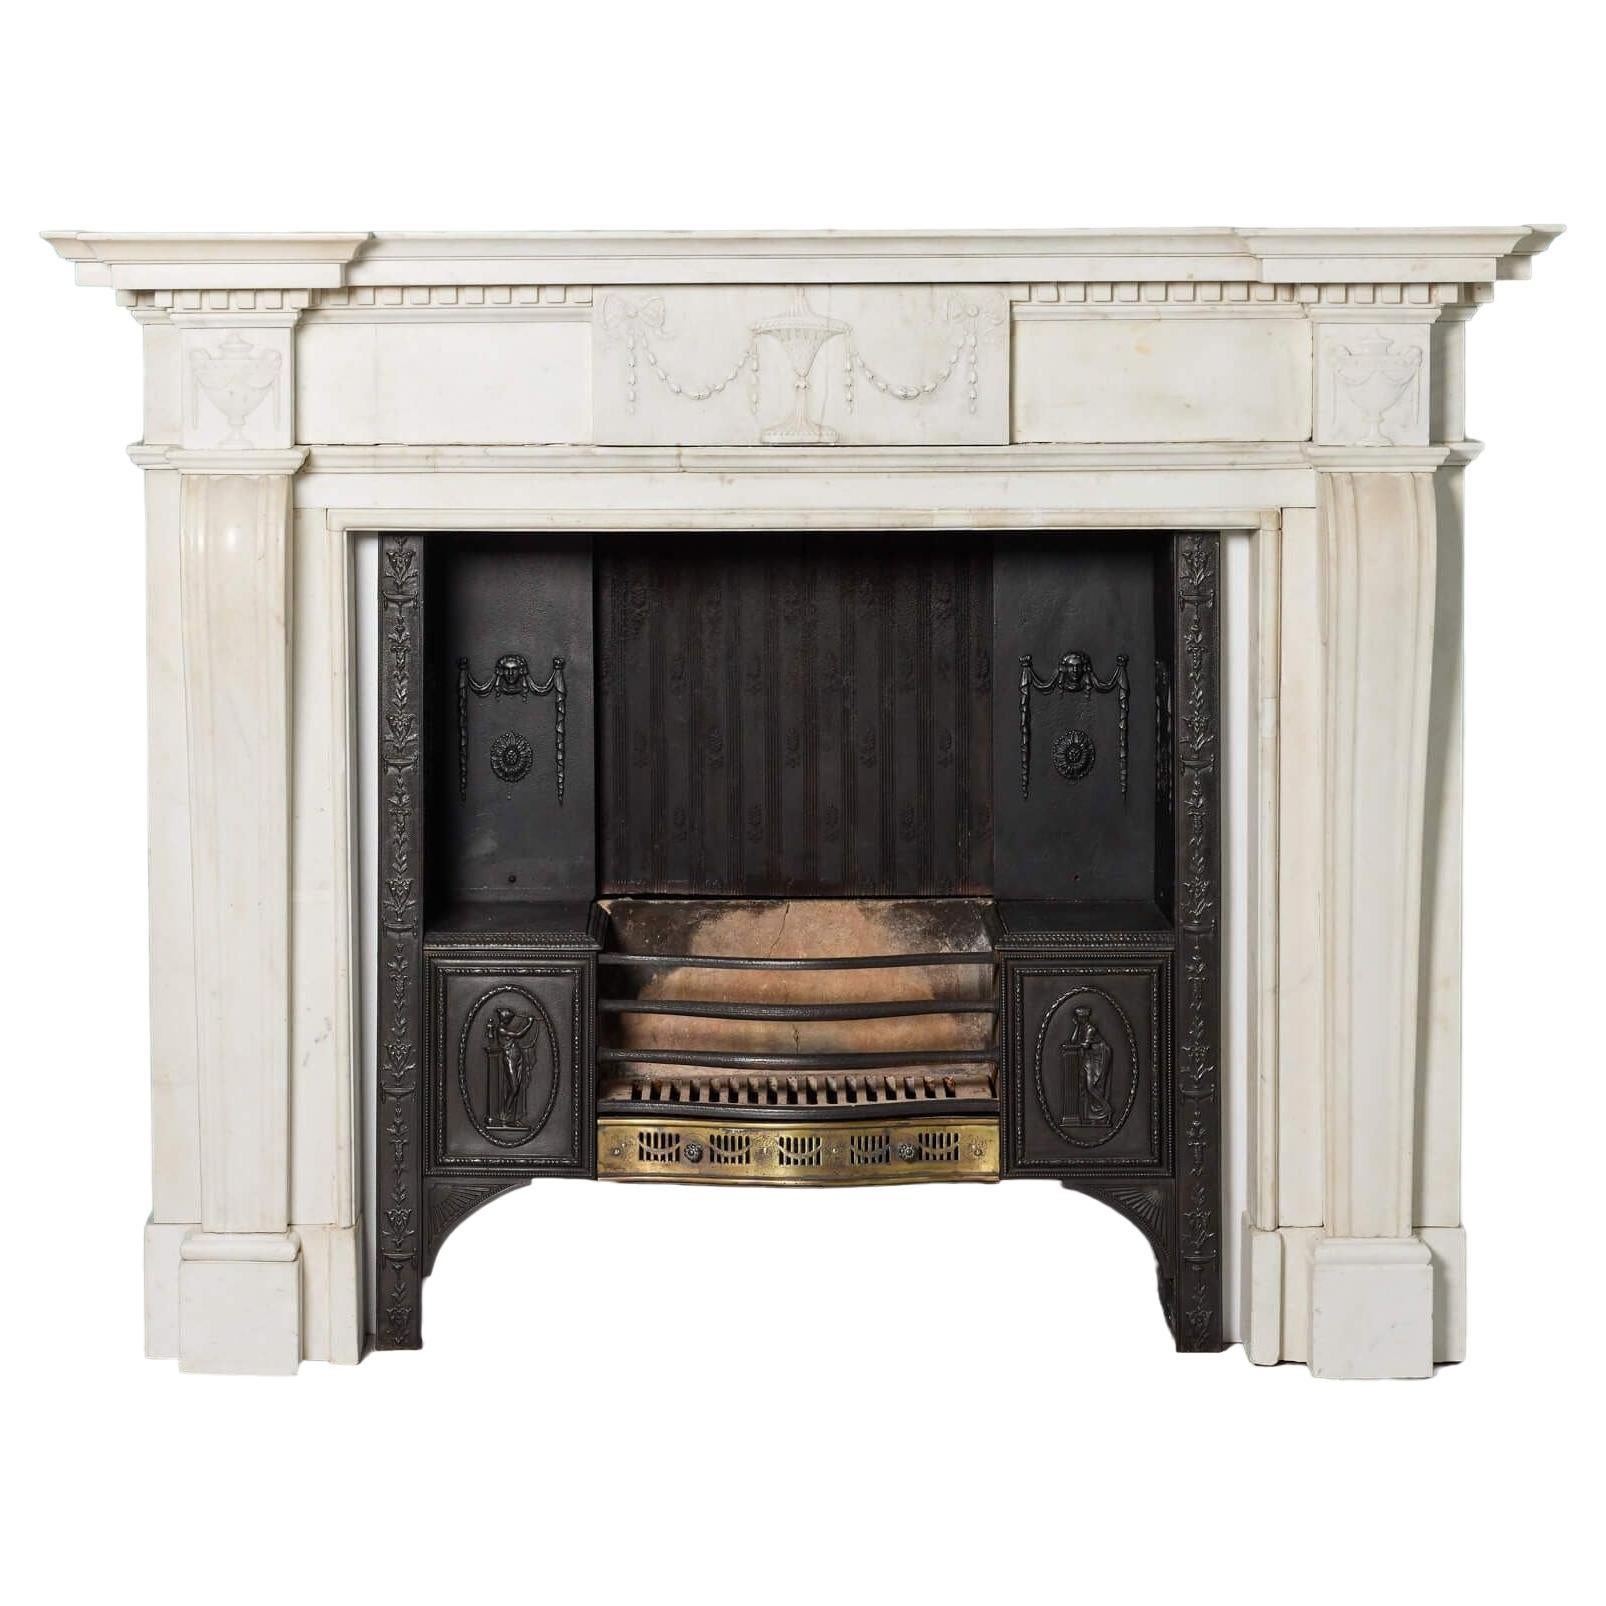 Antique George III Style Neoclassical Marble Fireplace For Sale